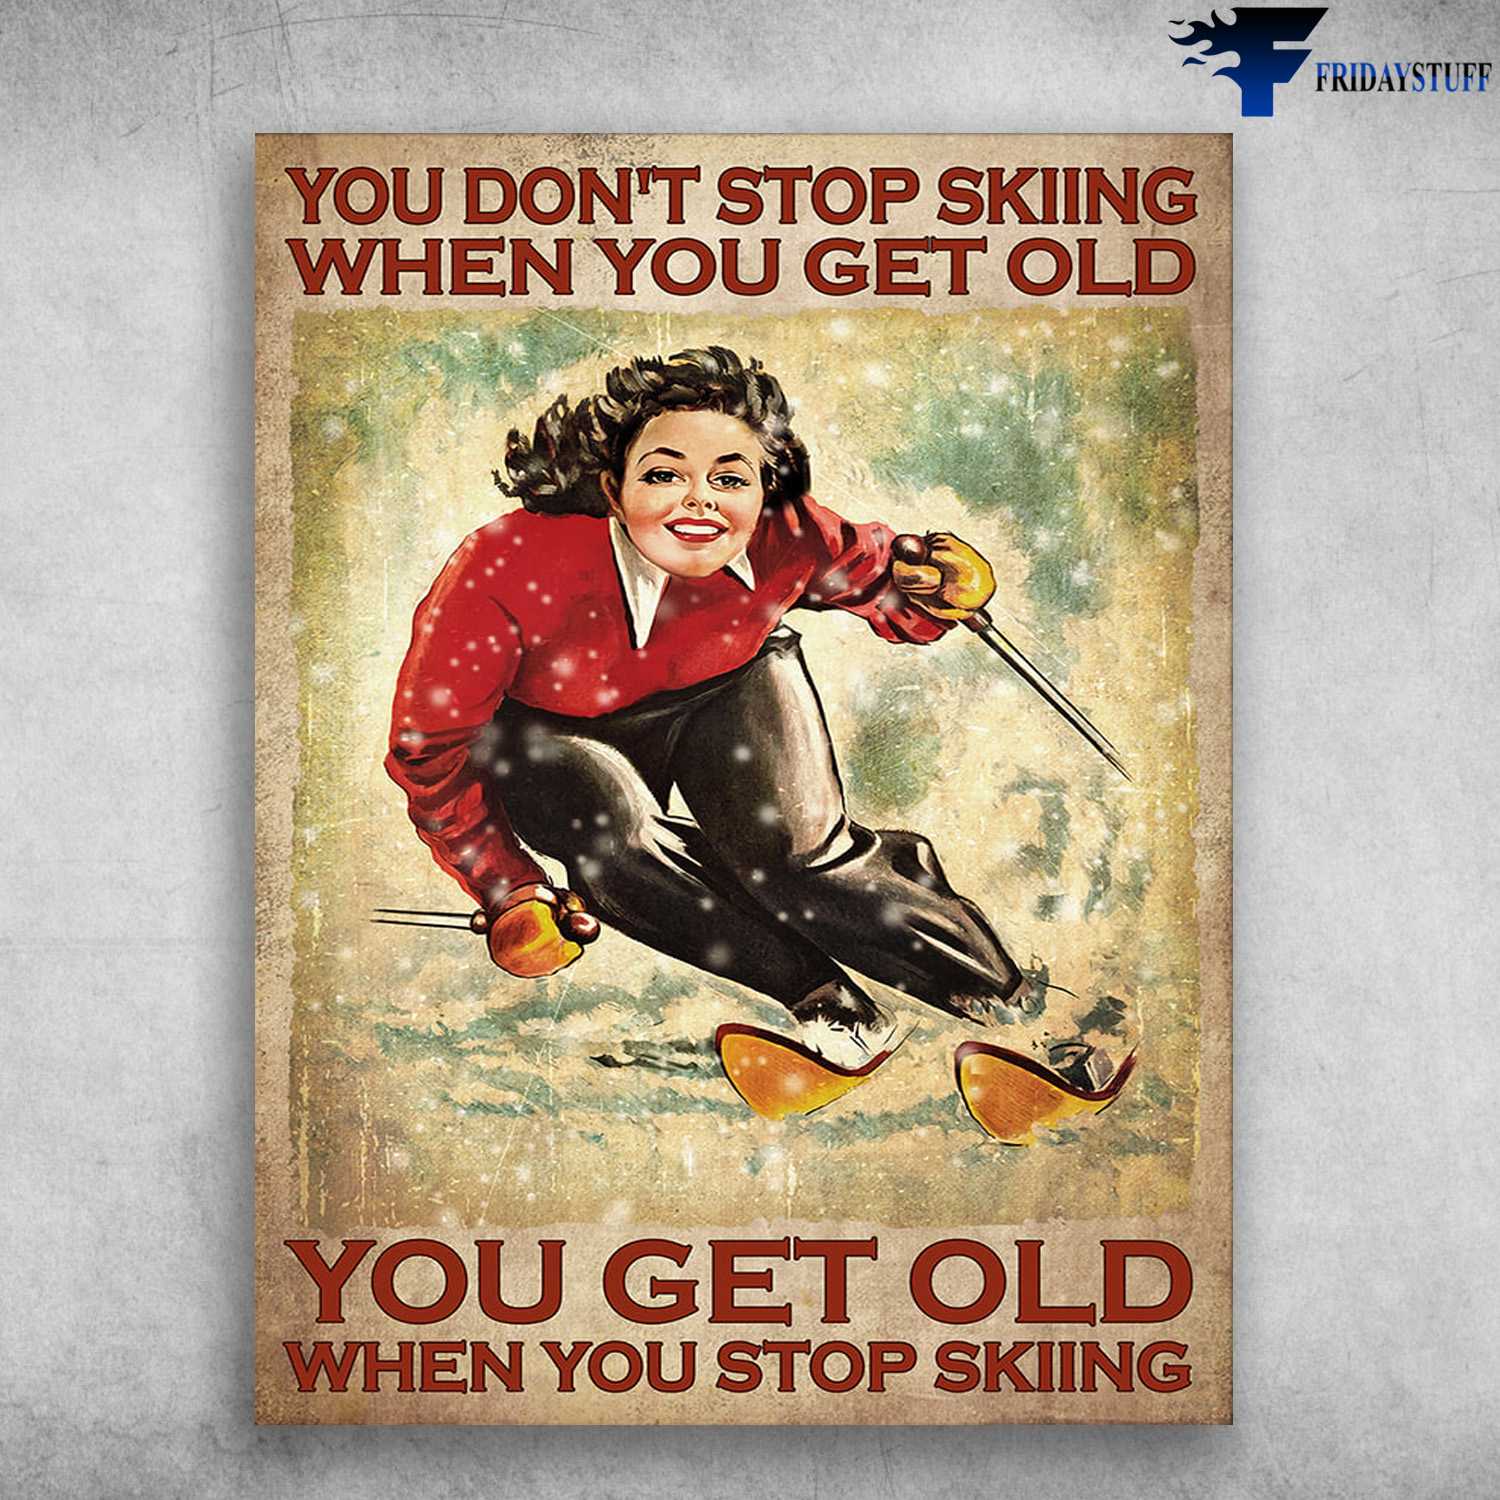 Skiing Girl, Skiing Poster - You Don't Stop Skiing When You Get Old, You Get Old When You Stop Skiing